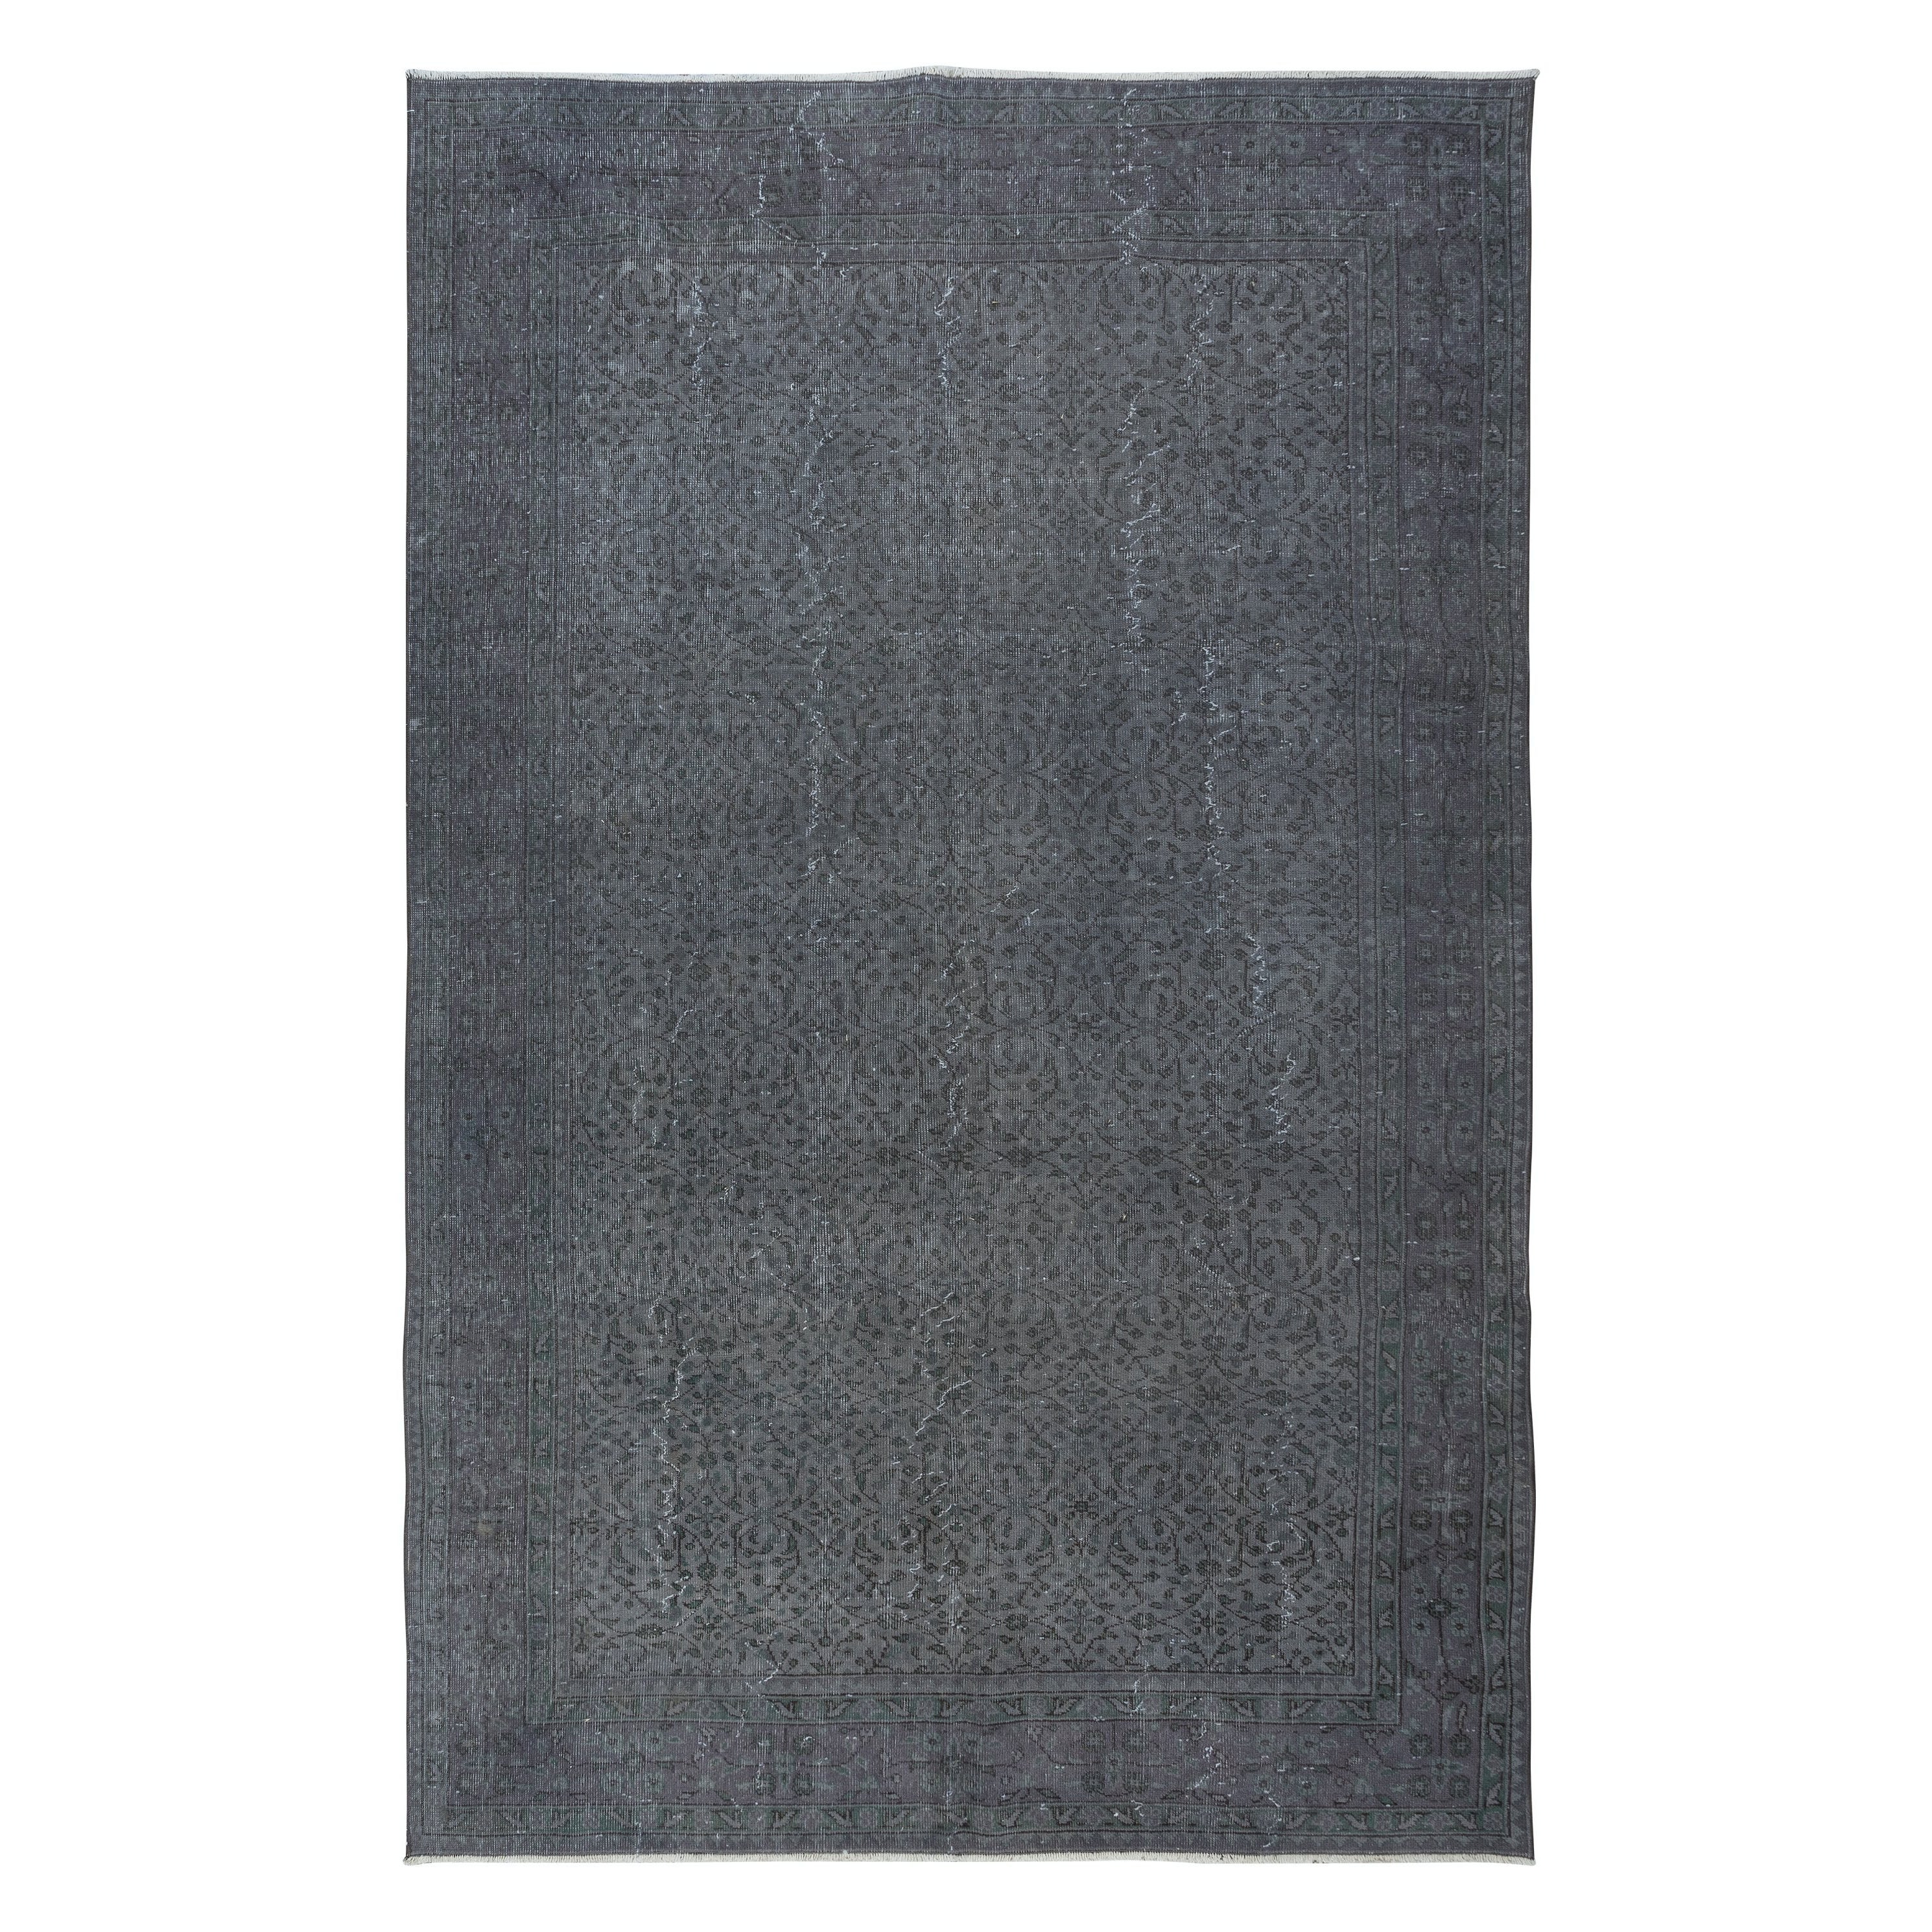 6.7x10.4 Ft Handmade Turkish Area Rug in Gray, Ideal for Modern Home and Office For Sale